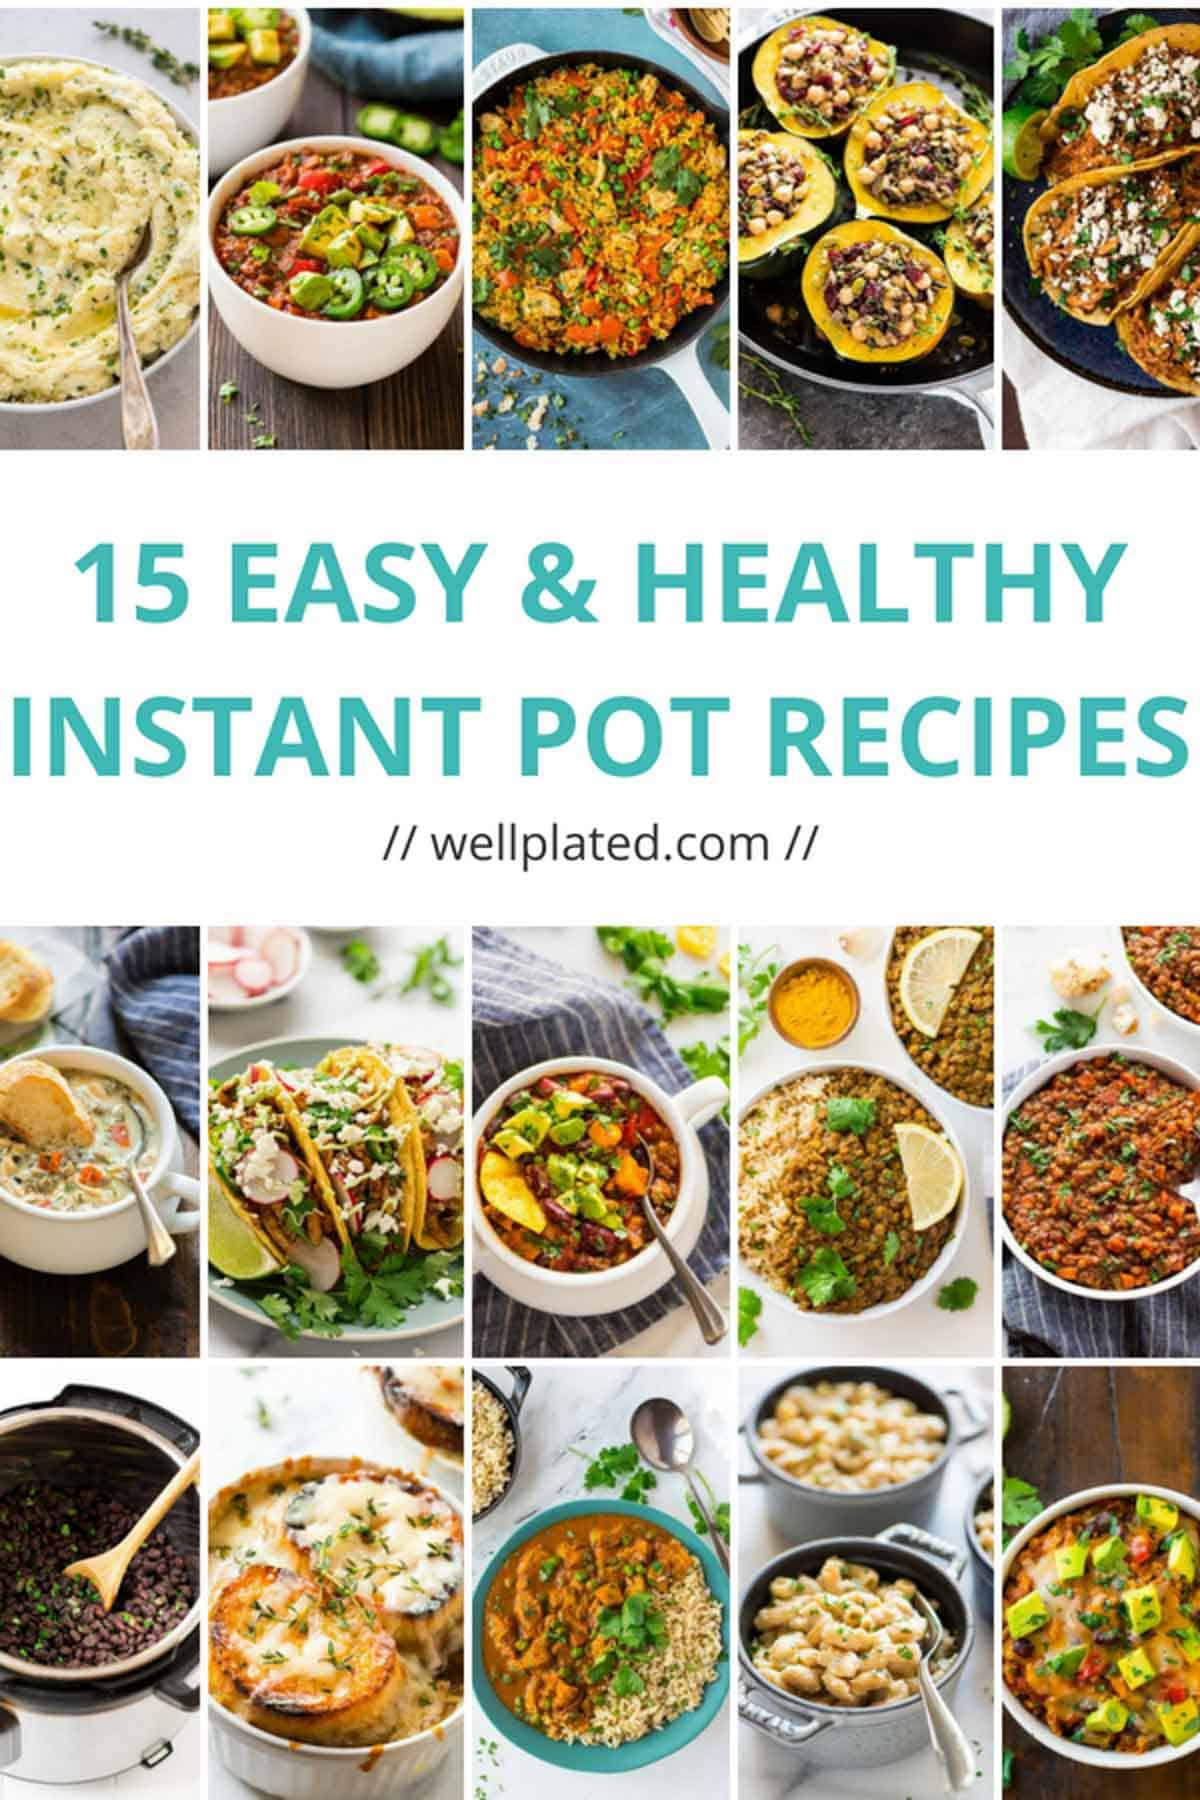 Easy Healthy Instant Pot Recipes
 15 Healthy Instant Pot Recipes That Anyone Can Make